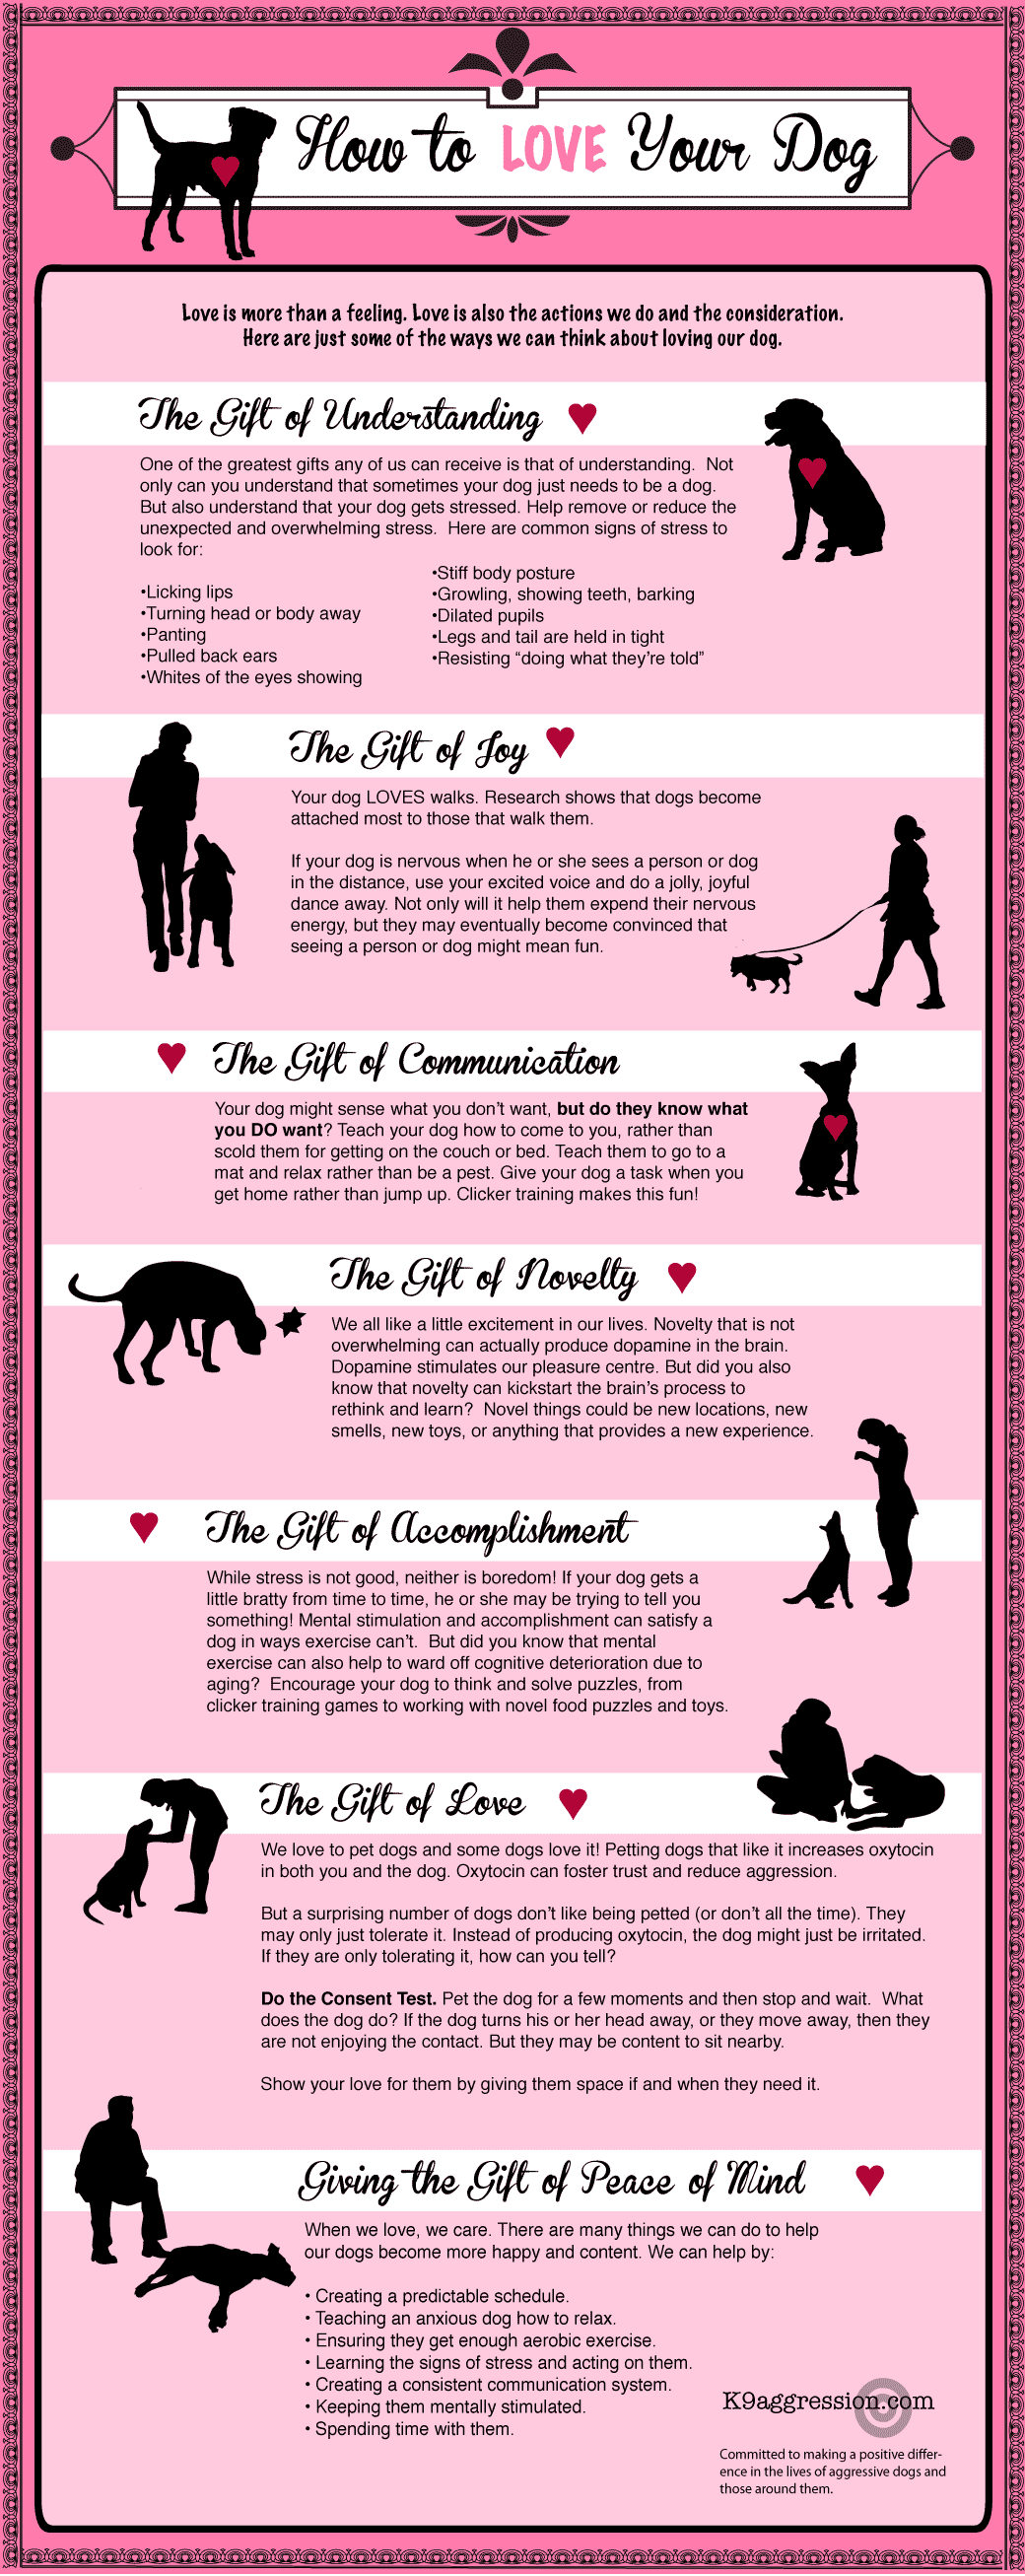 How to Love Your Dog Infographic